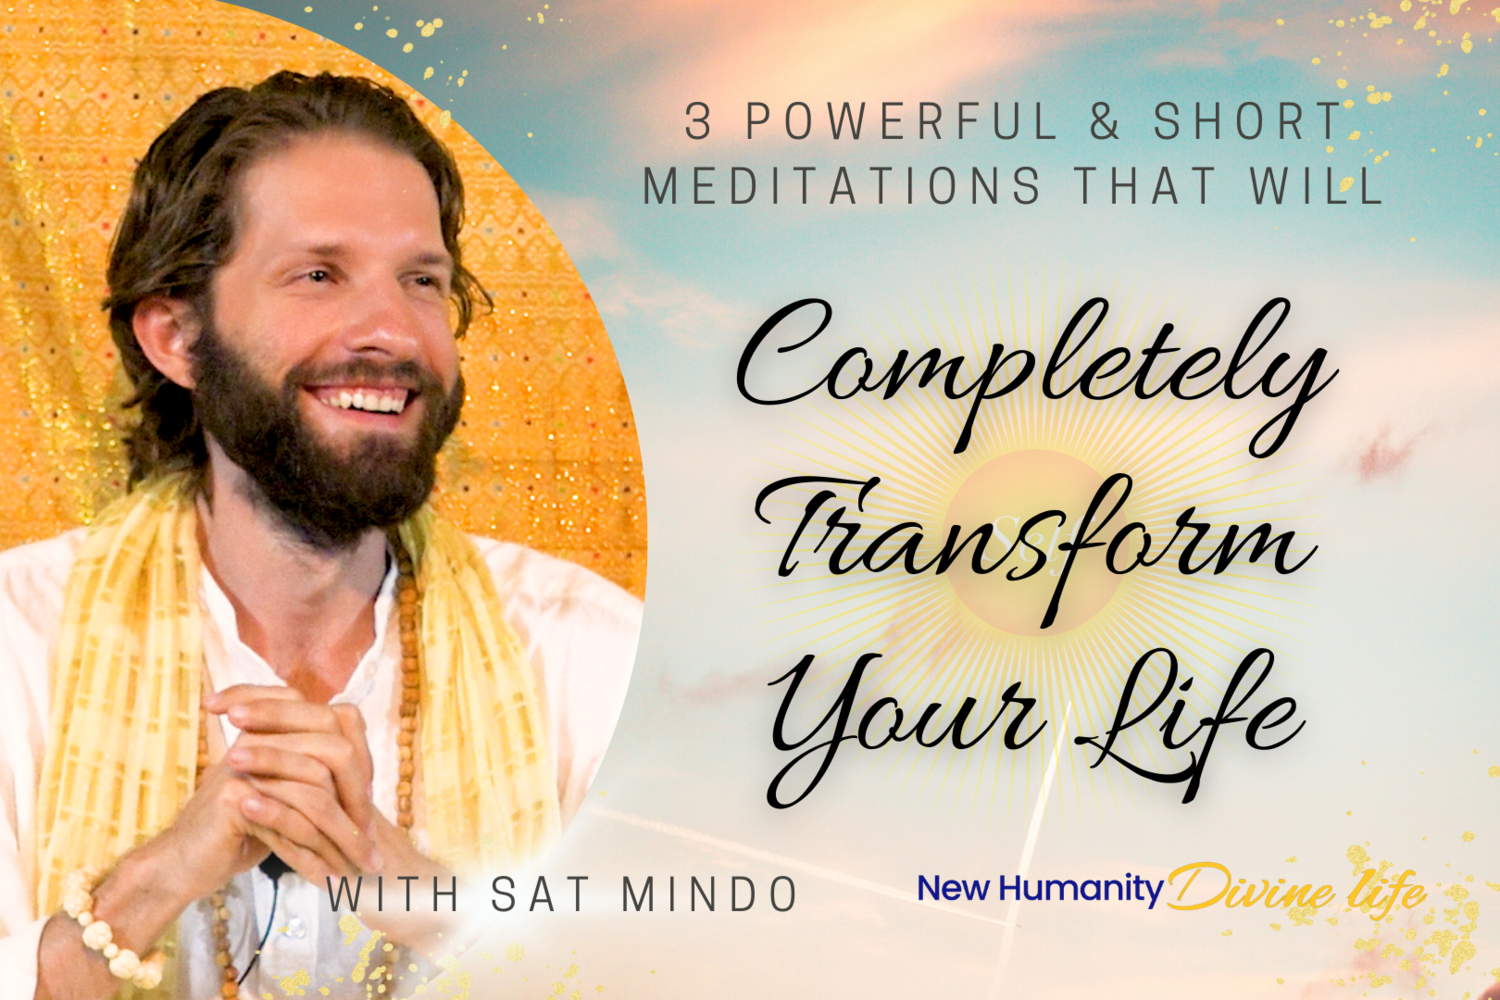 3 Powerful & Short Meditations that will Completely Transform Your Life